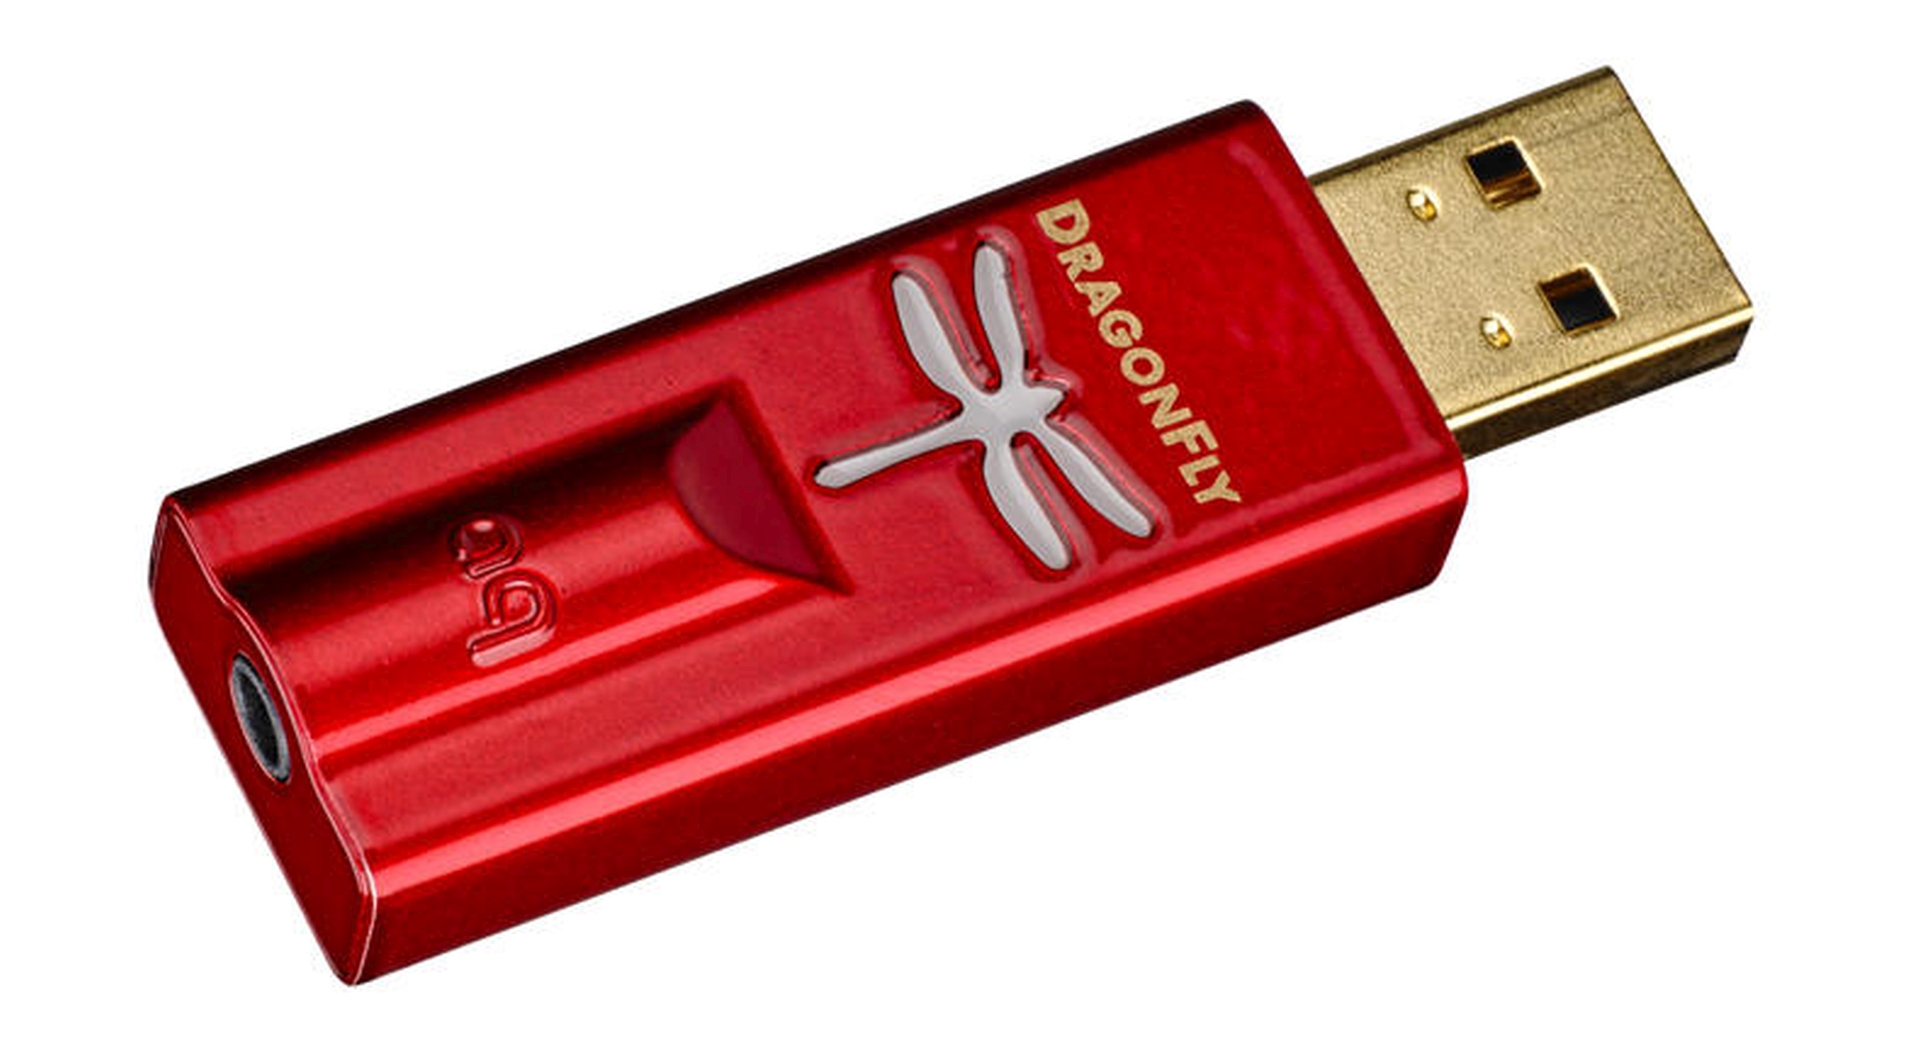 Audioquest dragonfly red